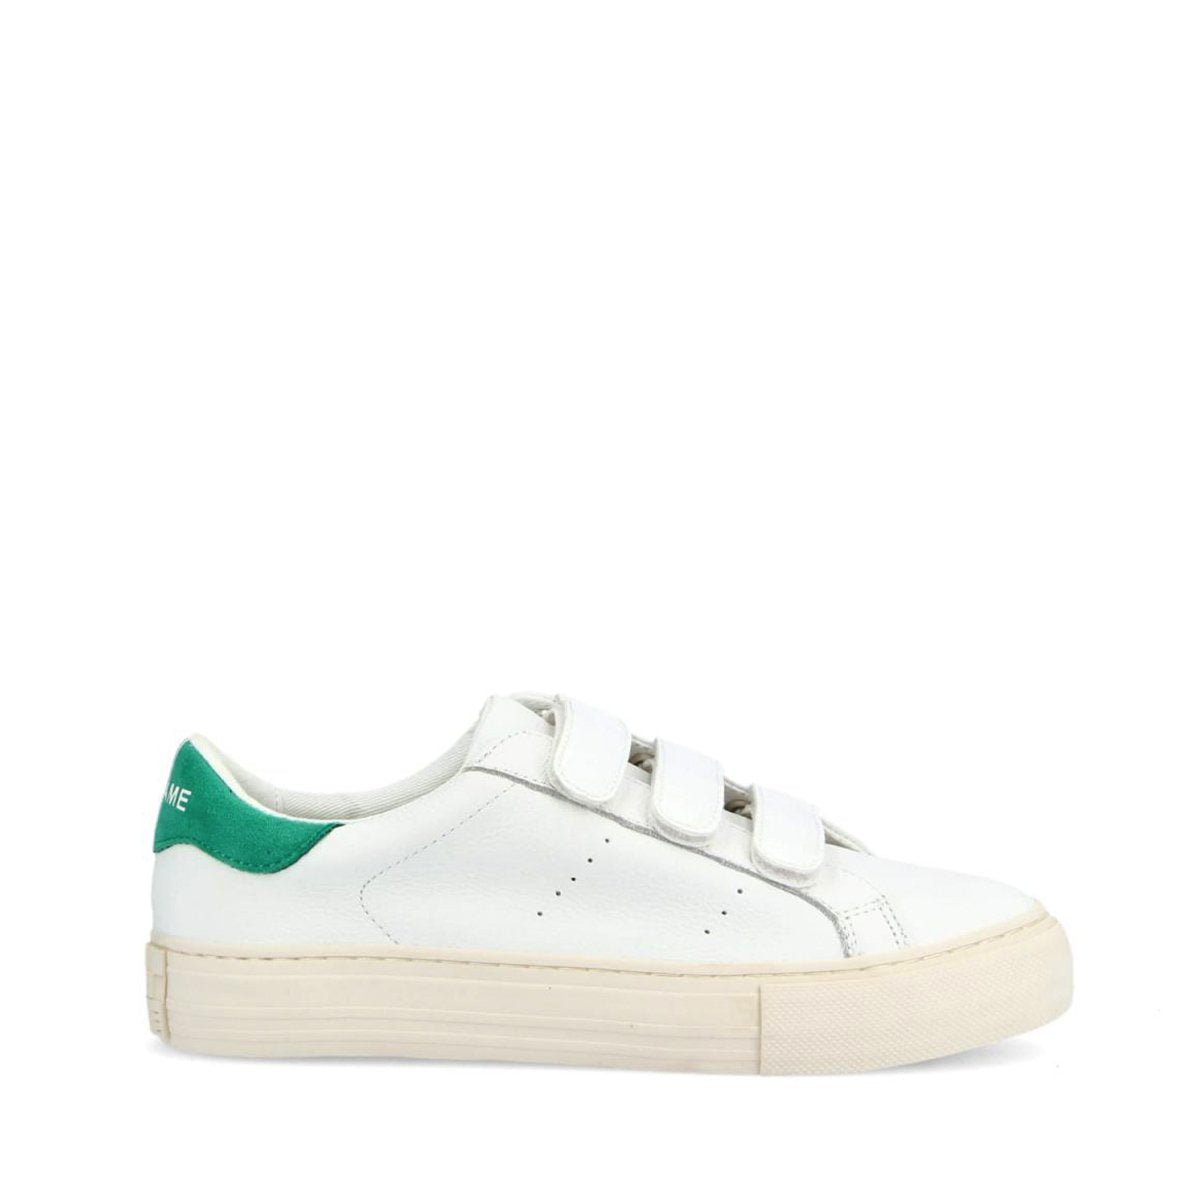 Arcade Straps White Menthe Sneakers KNGDRG042U - 1